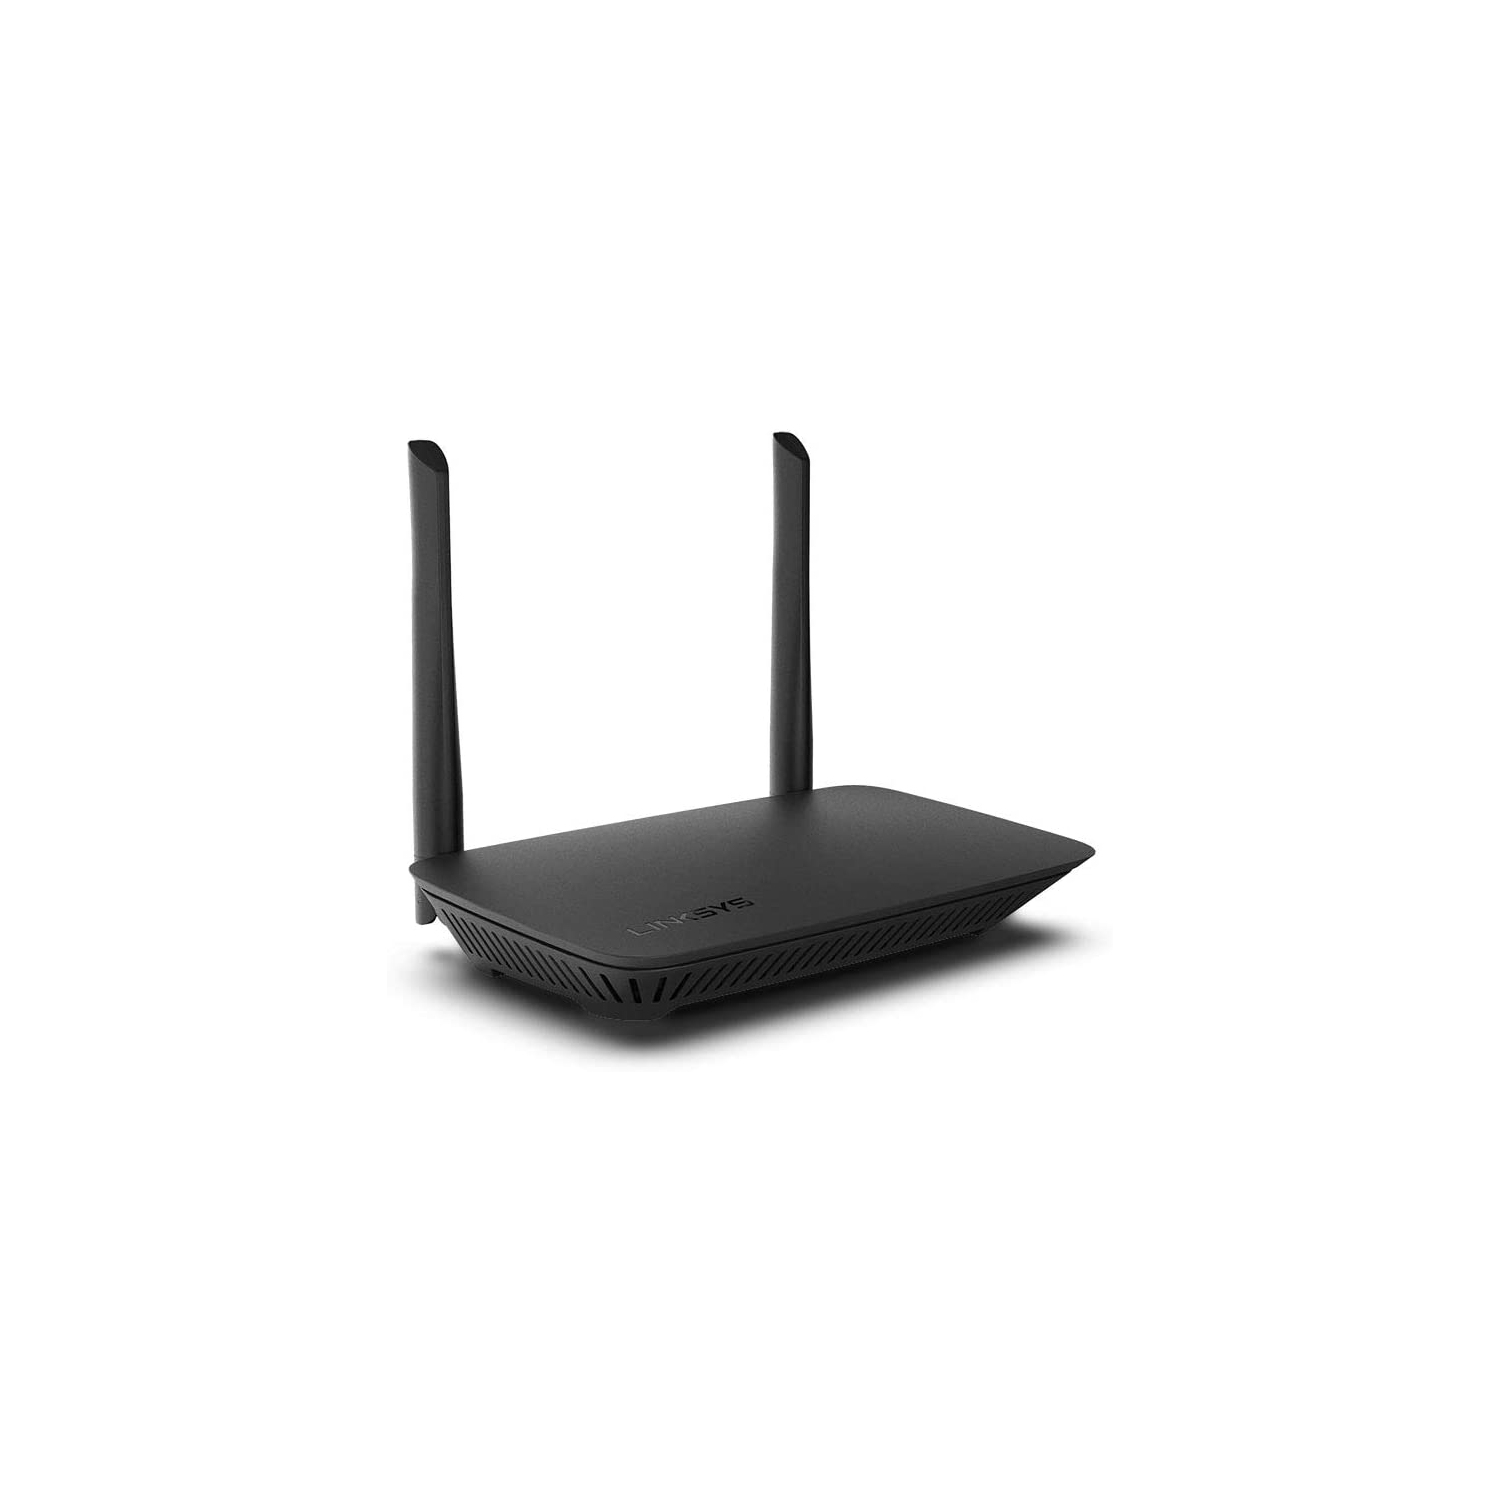 Linksys WiFi Router Dual-Band AC1200 (WiFi 5) Delivers Enhanced 1.2 Gbps Speed Range and Security - Black